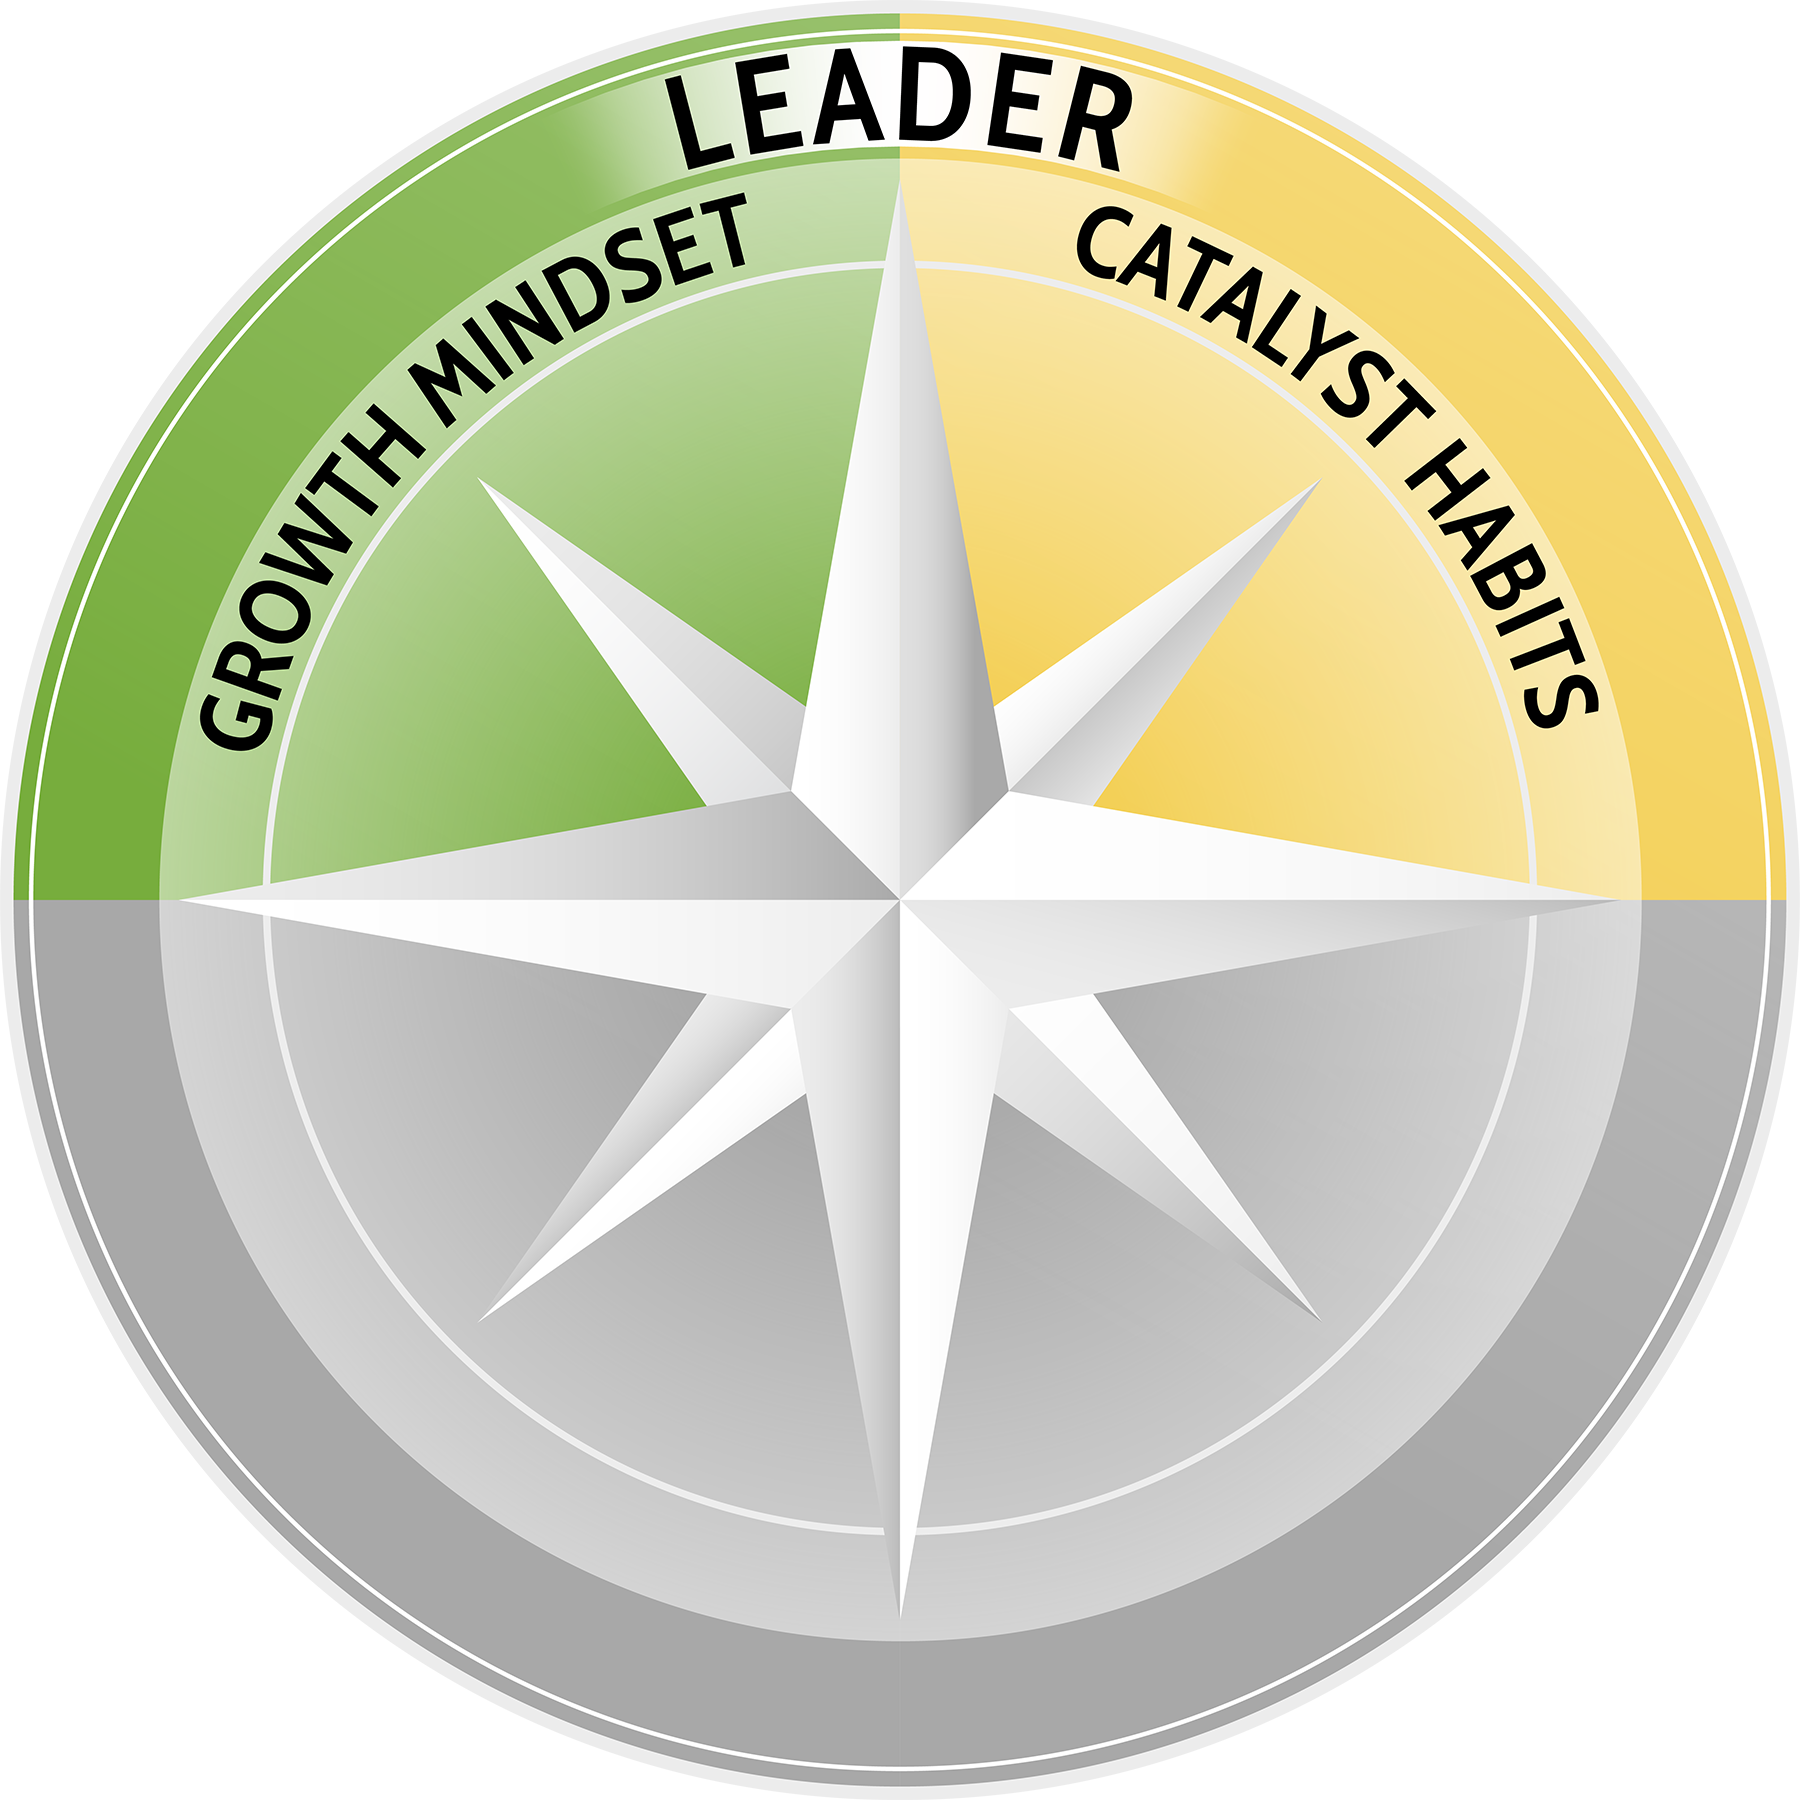 the top half of the leadership journey compass in color with the word leader over the words growth mindset and catalyst habits; the bottom half of the compass is in grey scale without words